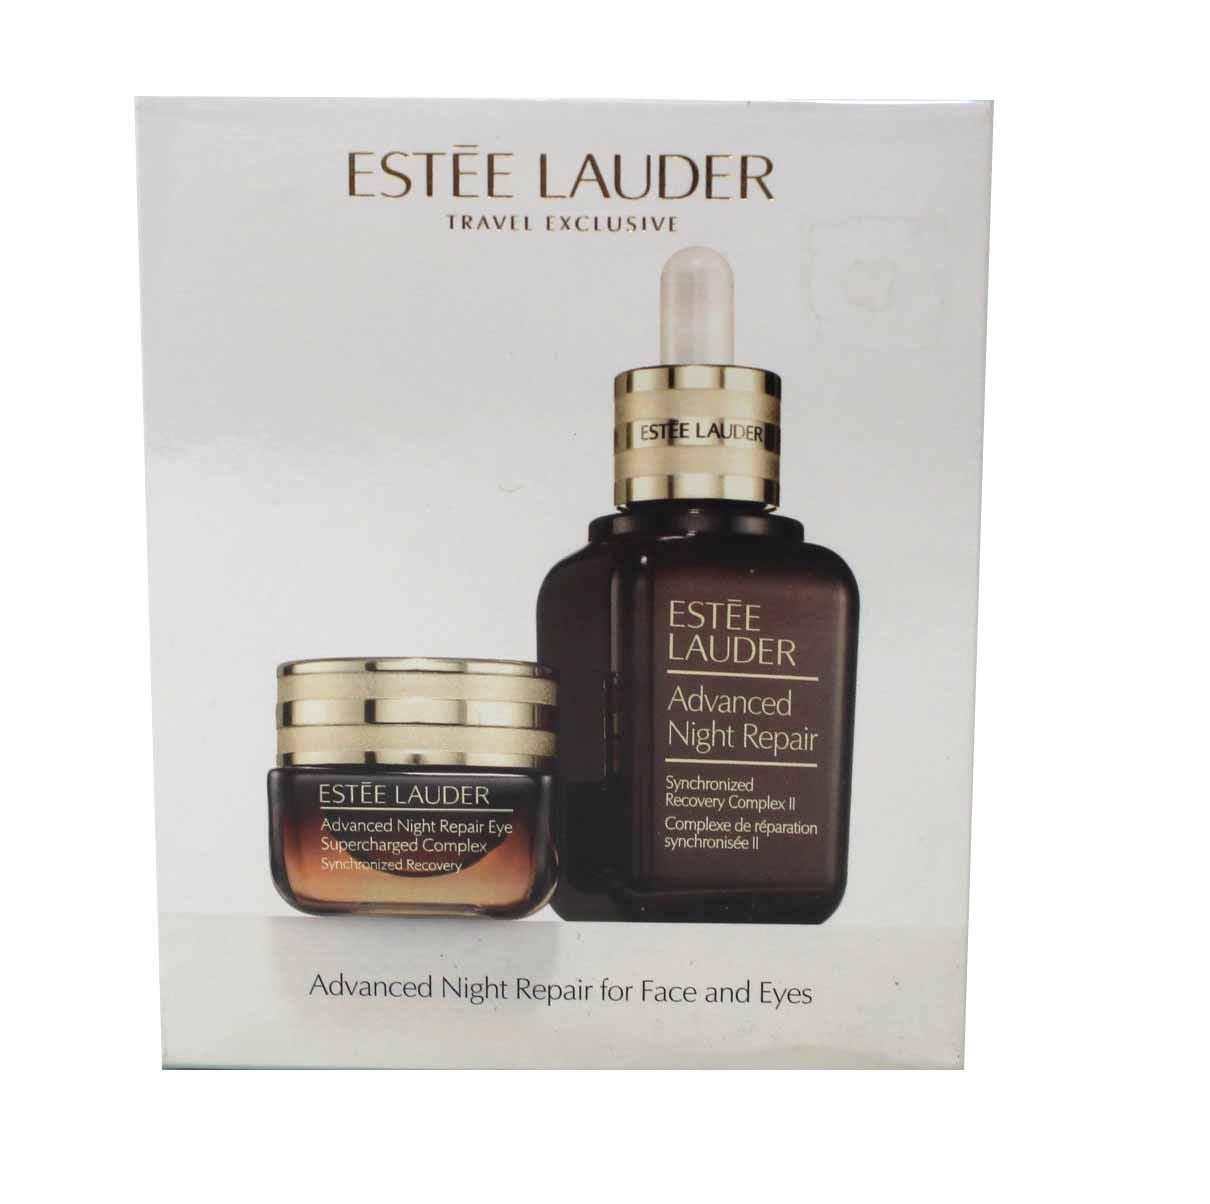 Estee Lauder Advanced Night Repair Synchronized Recovery Complex II for Face and Eyes Supercharged Complex 1 Set